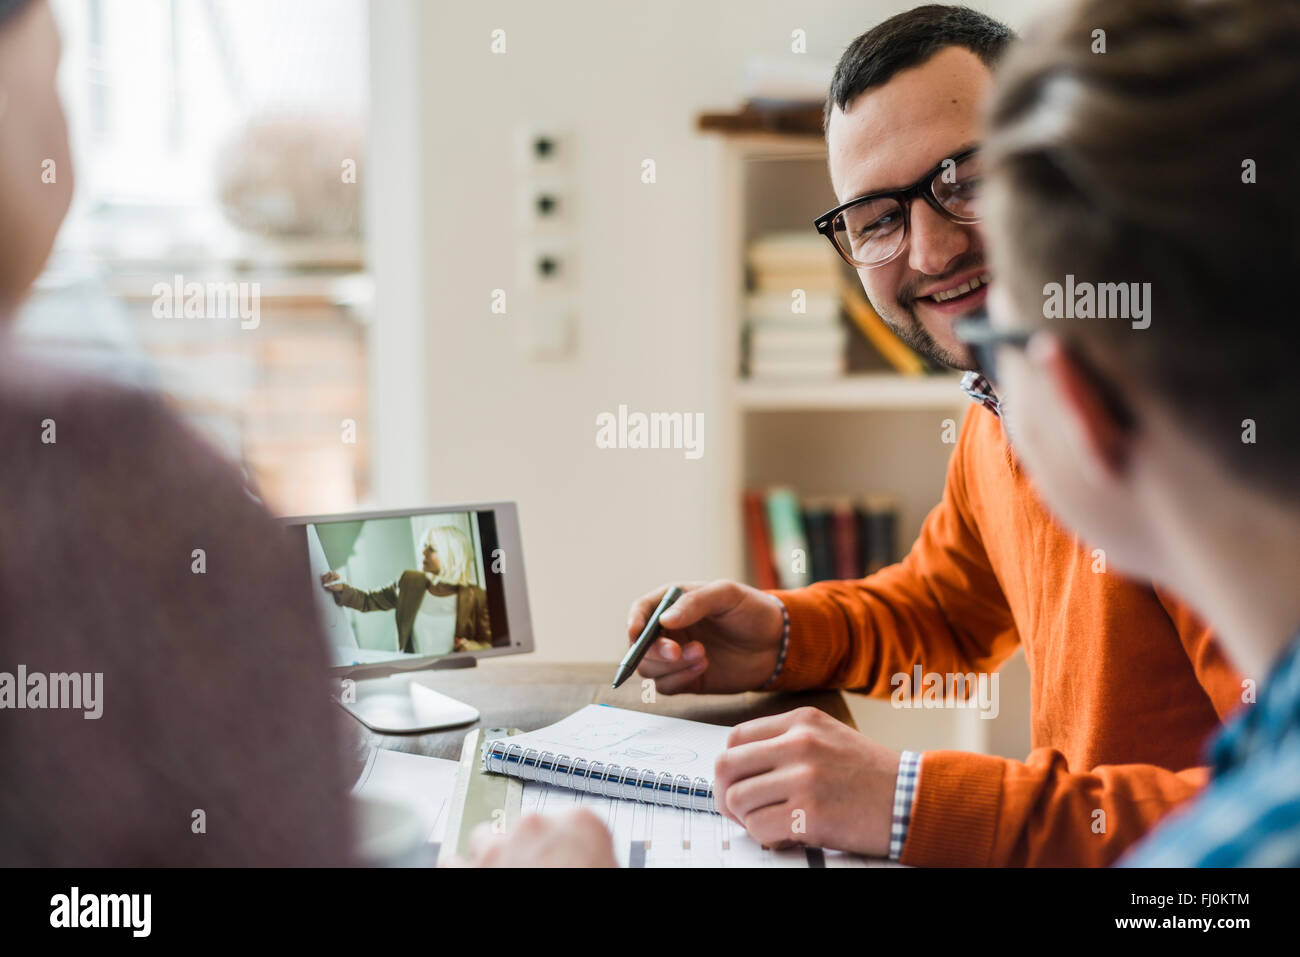 Colleagues discussing in office with video film on digital tablet in background Stock Photo